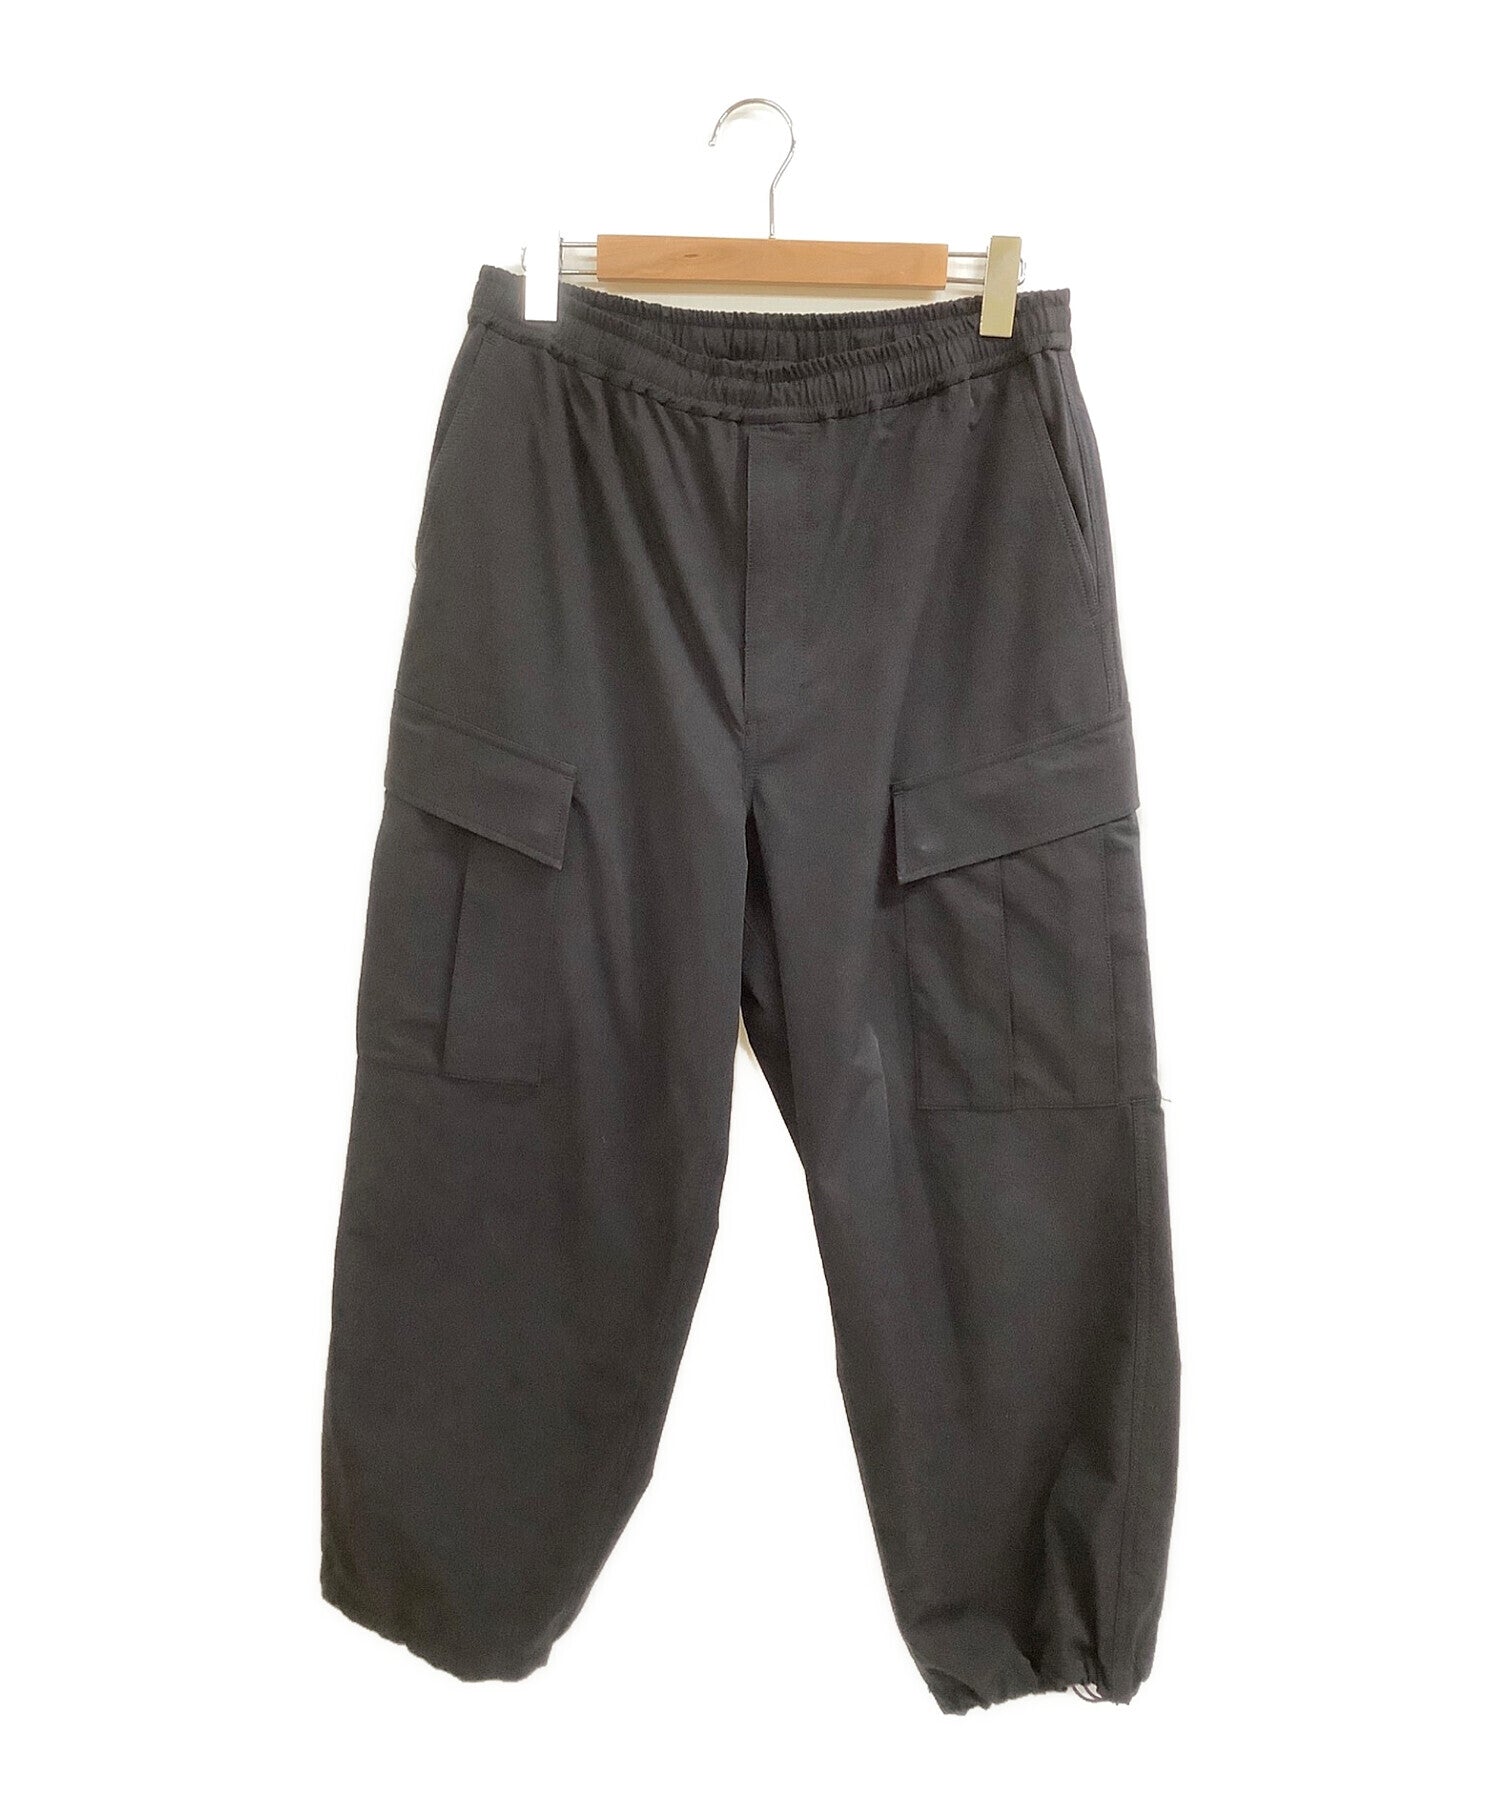 DAIWA PIER39 loose-fitting pants with an elastic or drawcord waist 